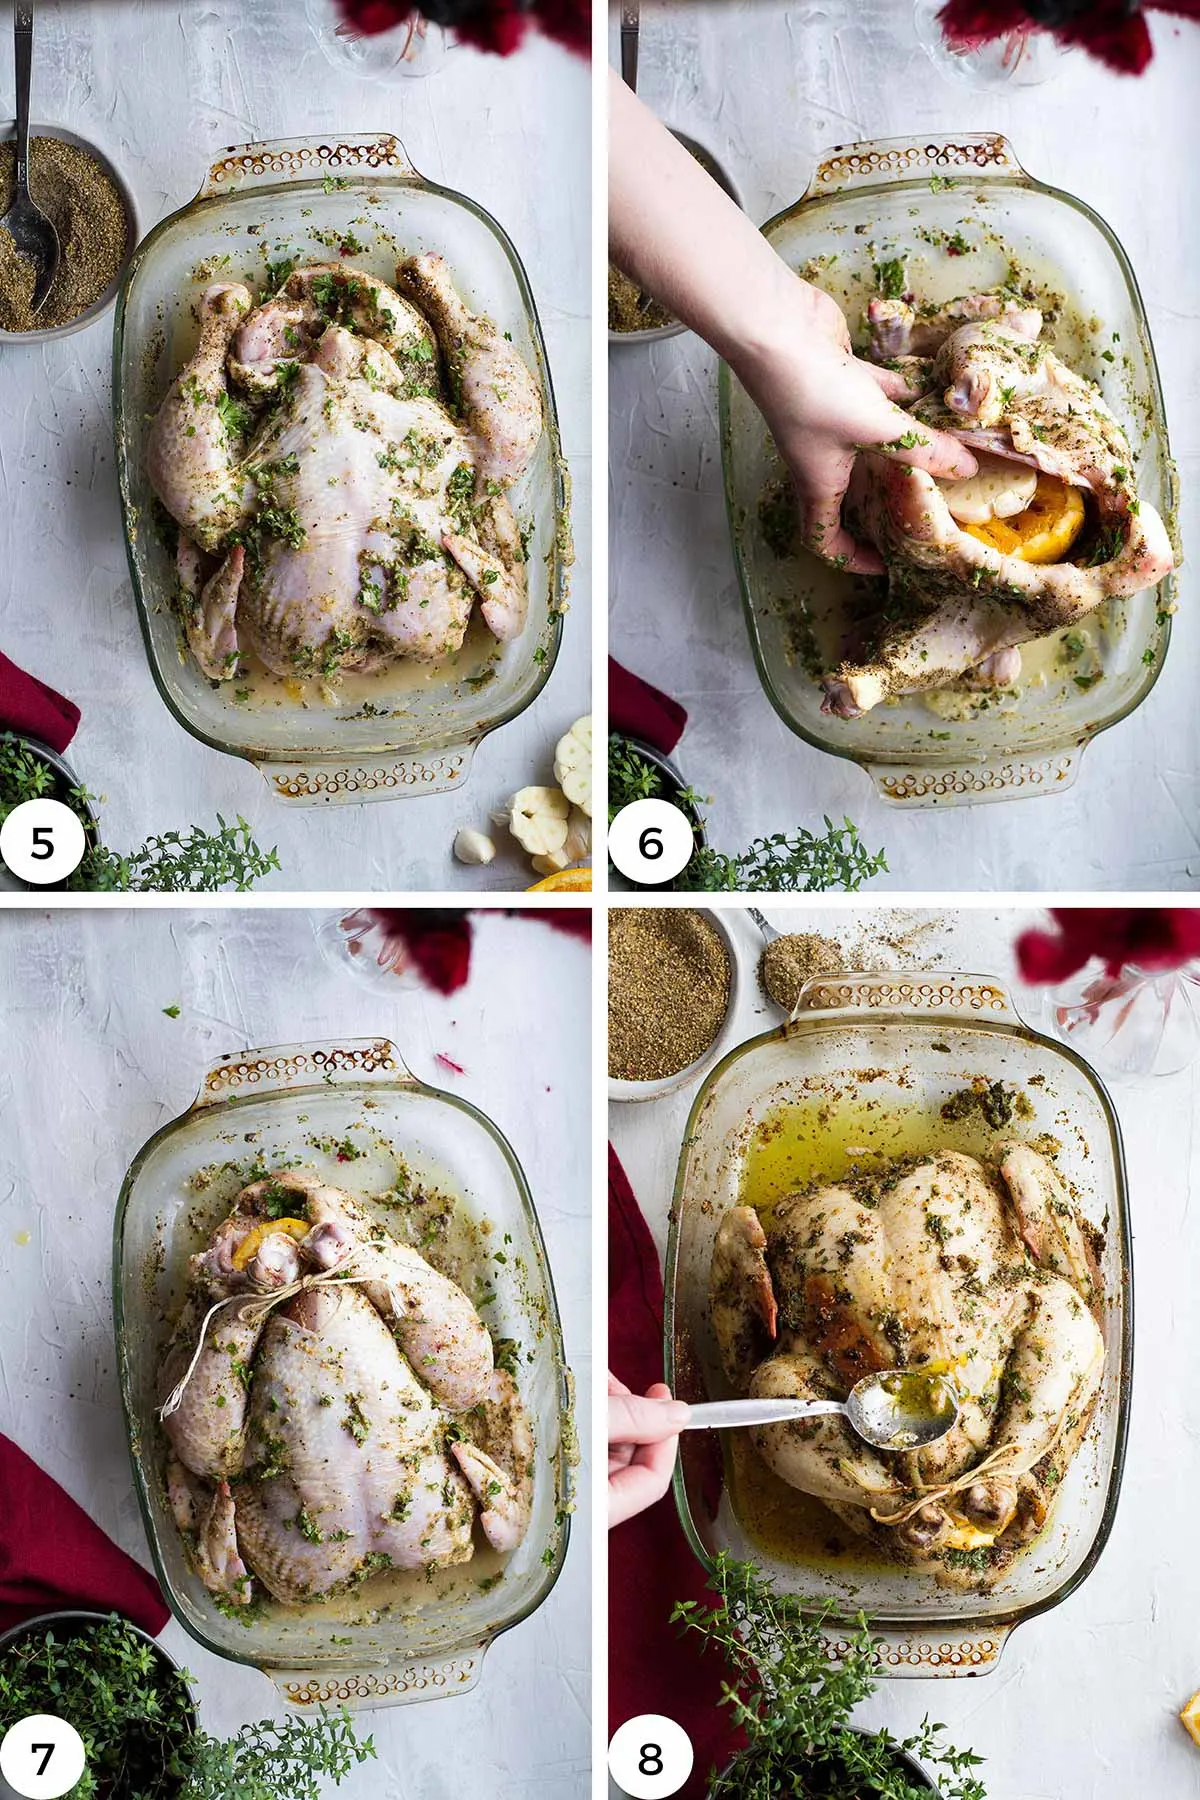 Steps to fill and rub the chicken.